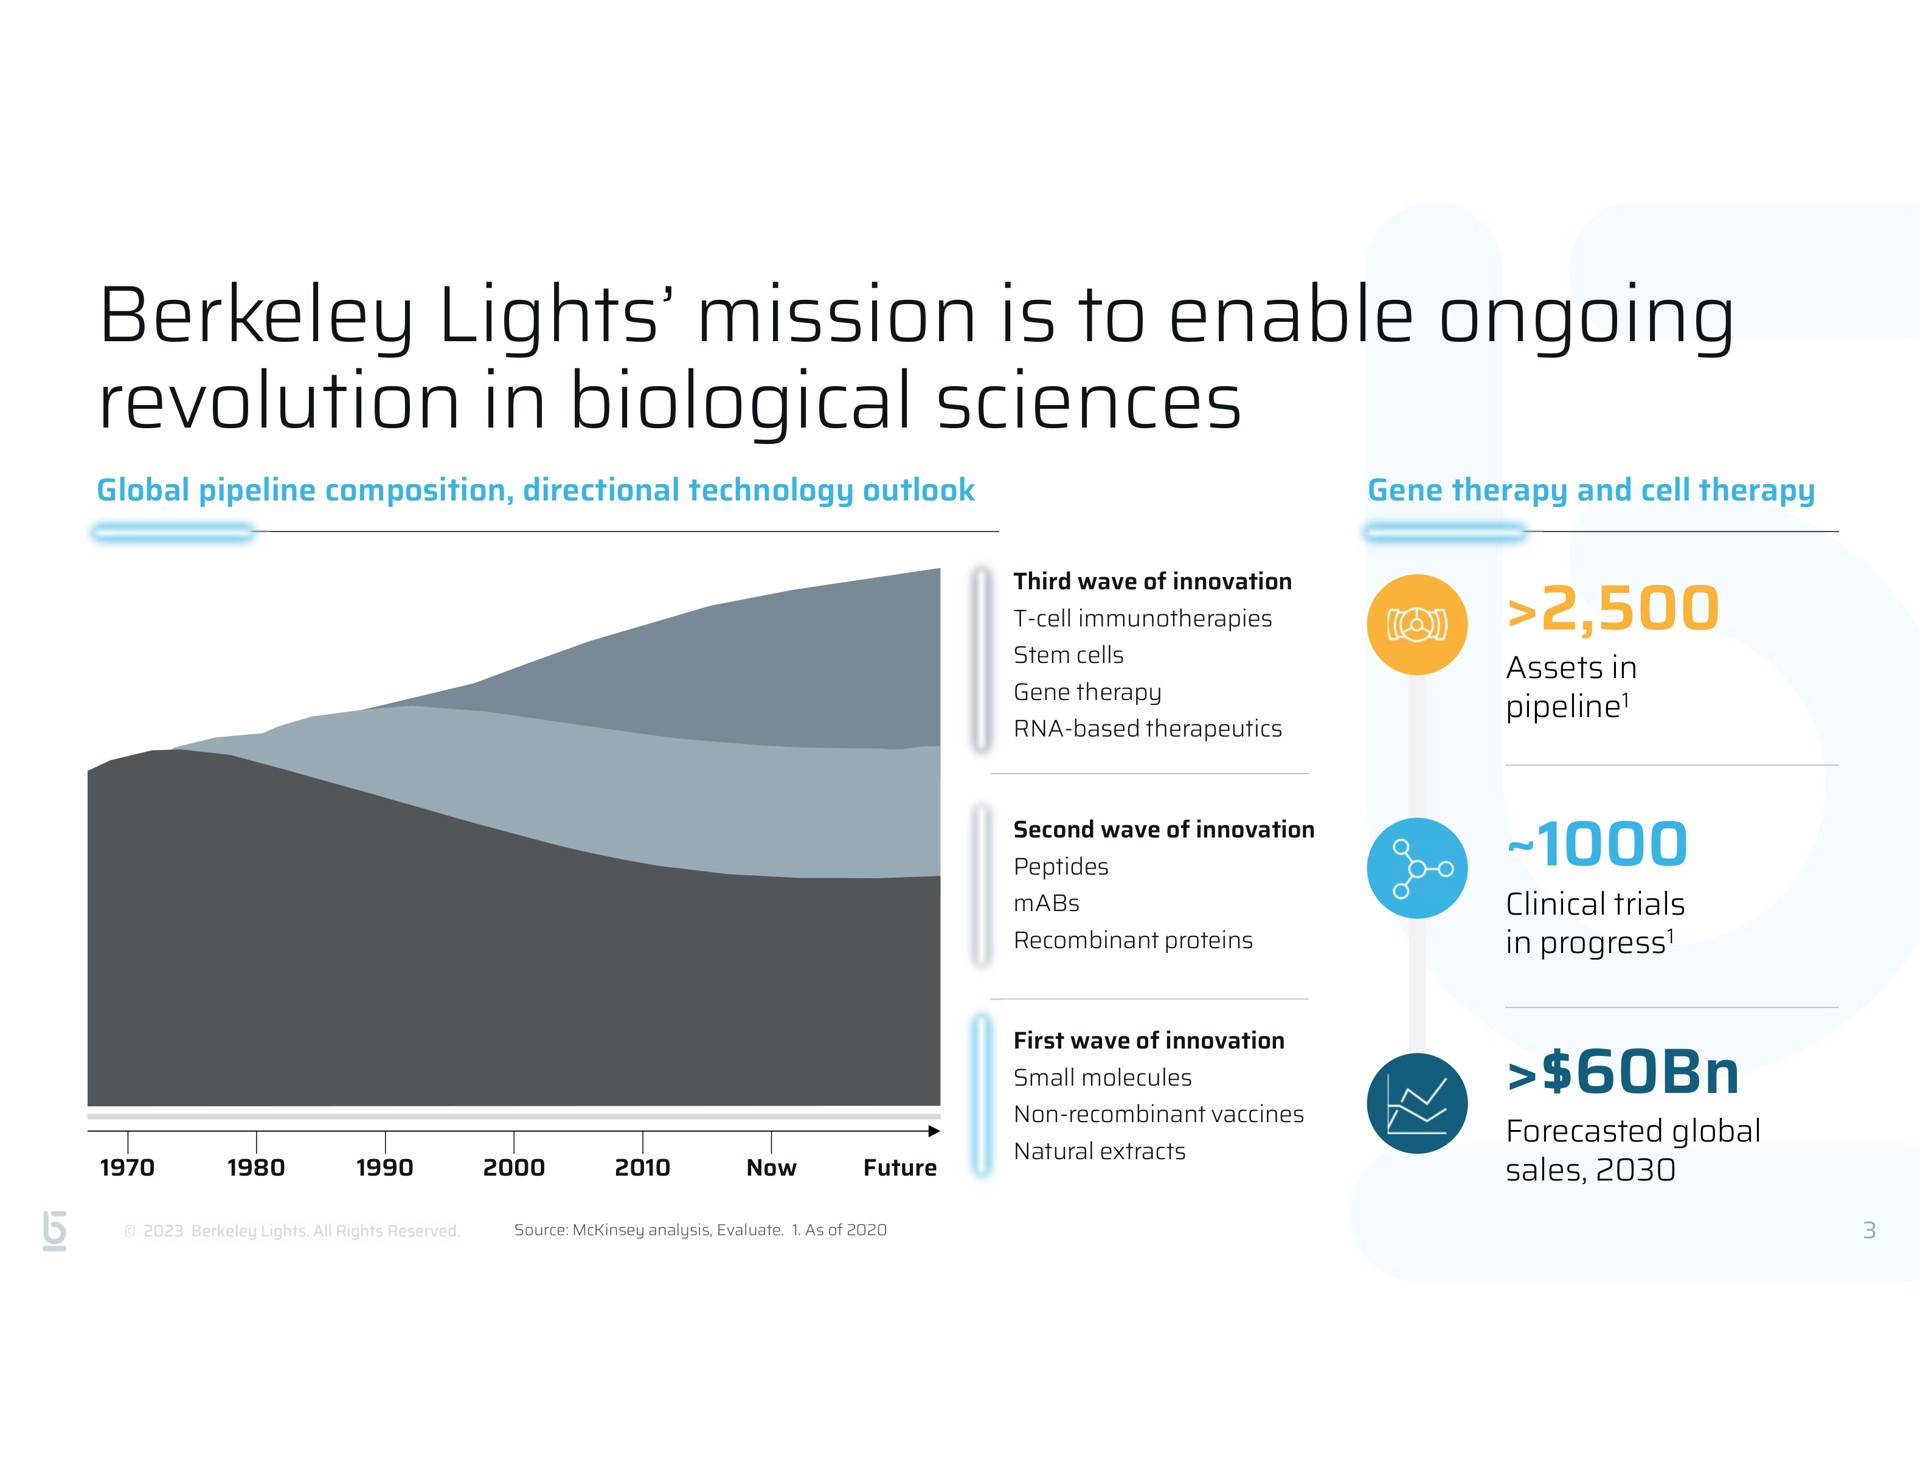 lights mission is to enable ongoing revolution in biological sciences | Berkeley Lights